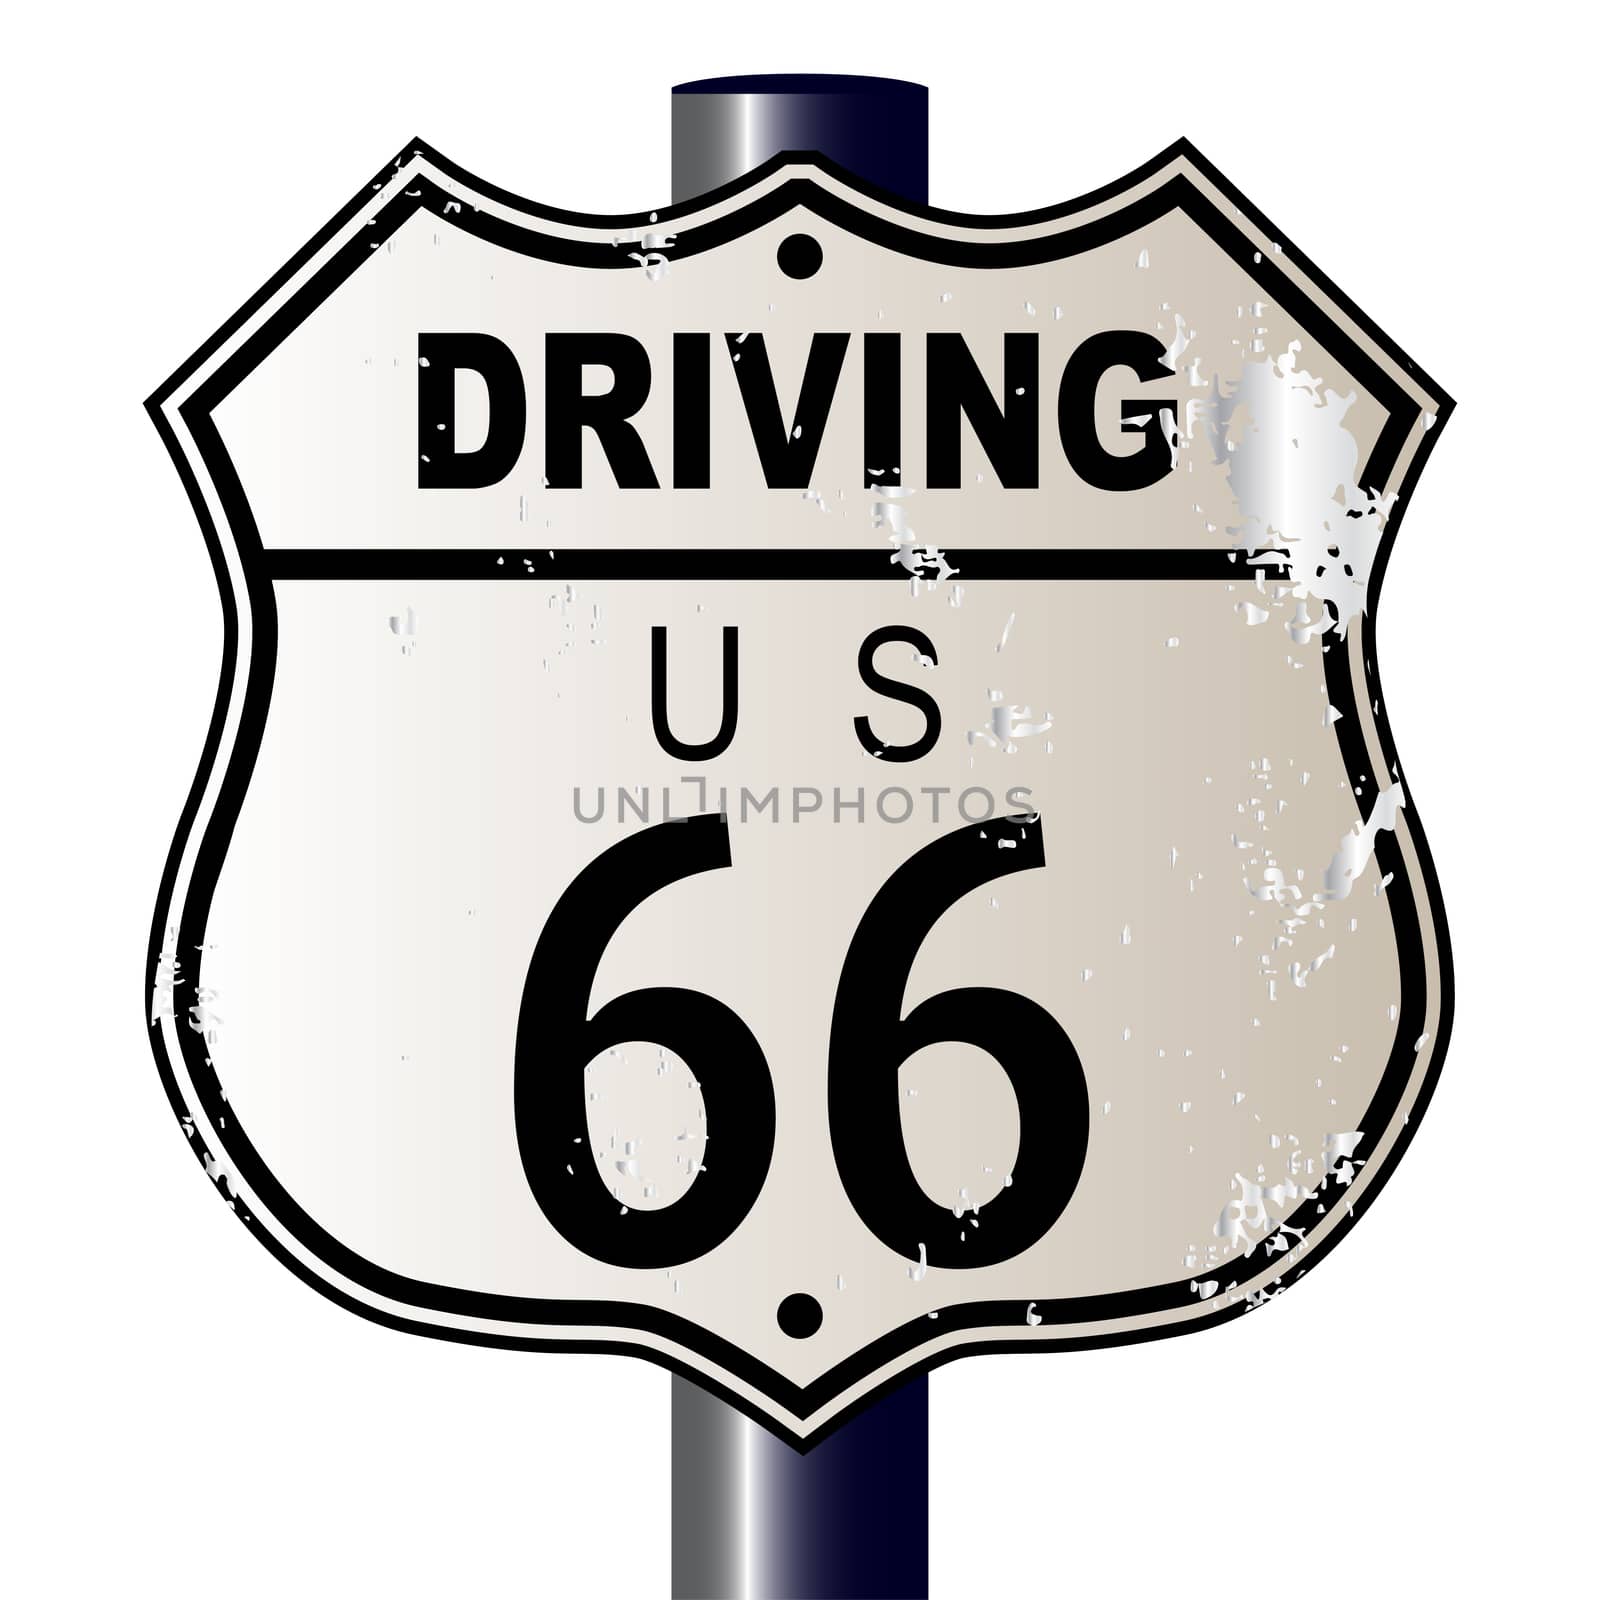 Driving Route 66 traffic sign over a white background and the legend DRIVING